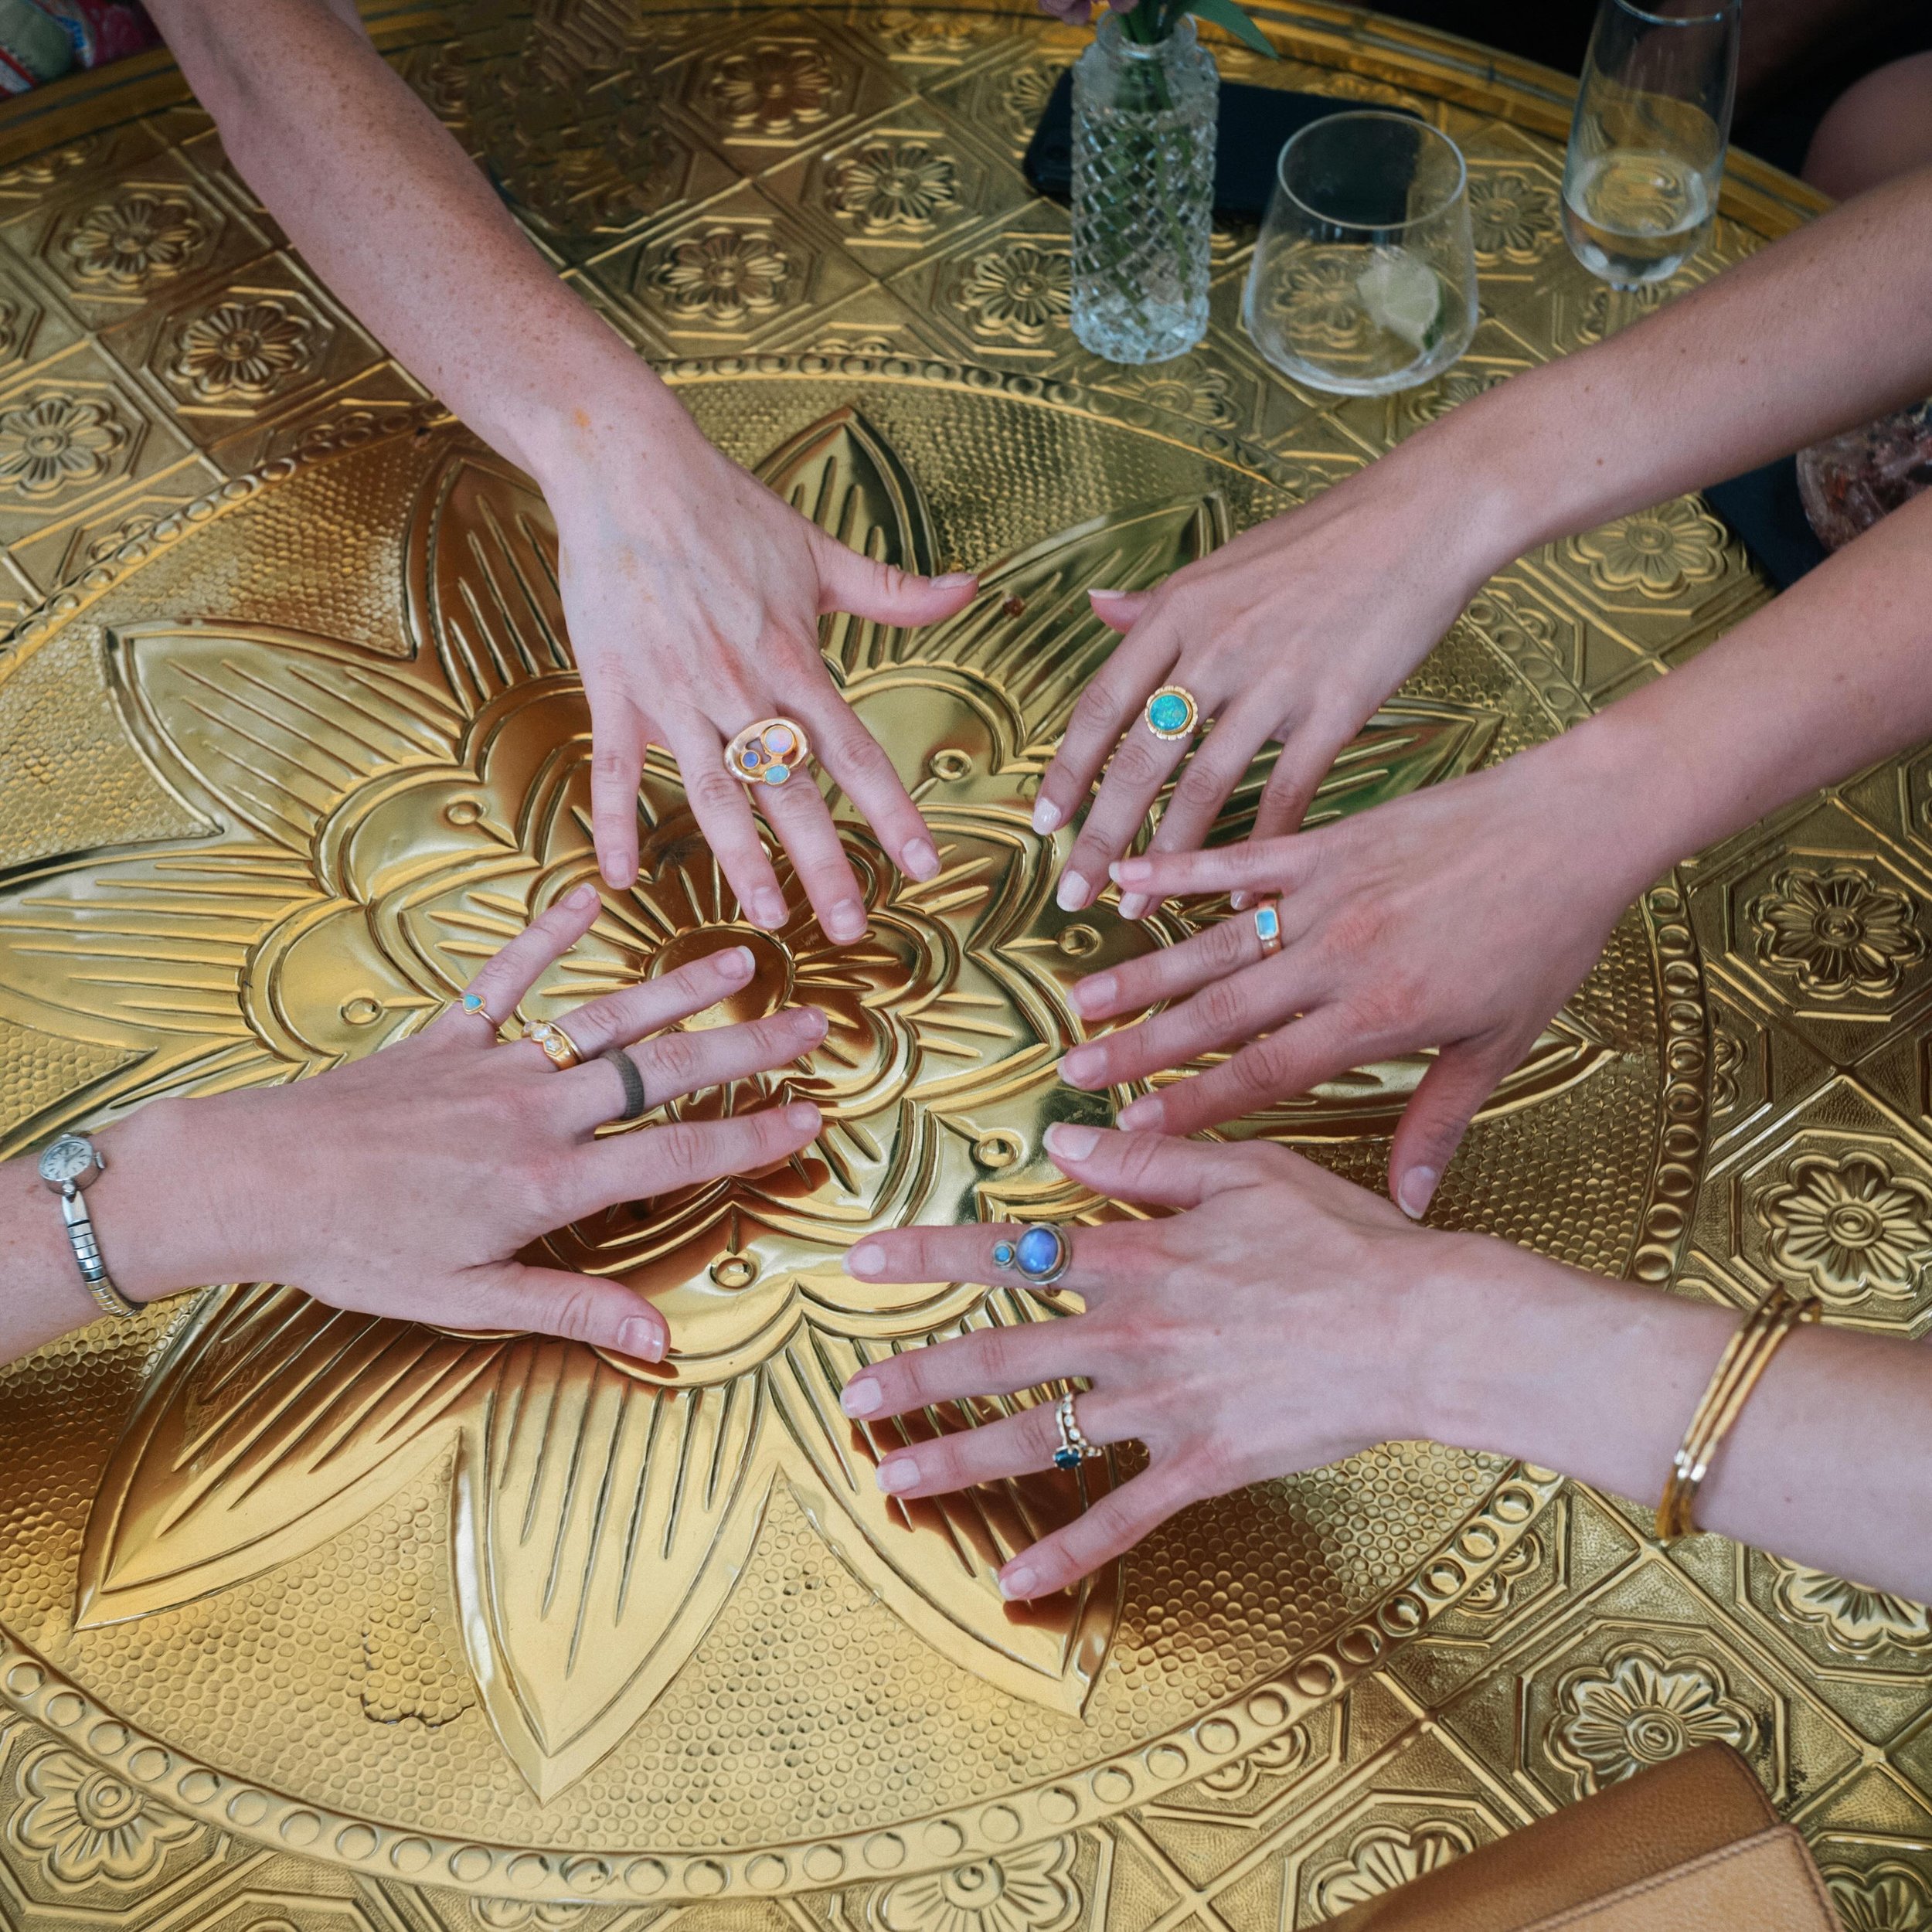 The ladies in all their custom rings at my wedding. So grateful for such supportive friends. Couldn&rsquo;t do it without em.